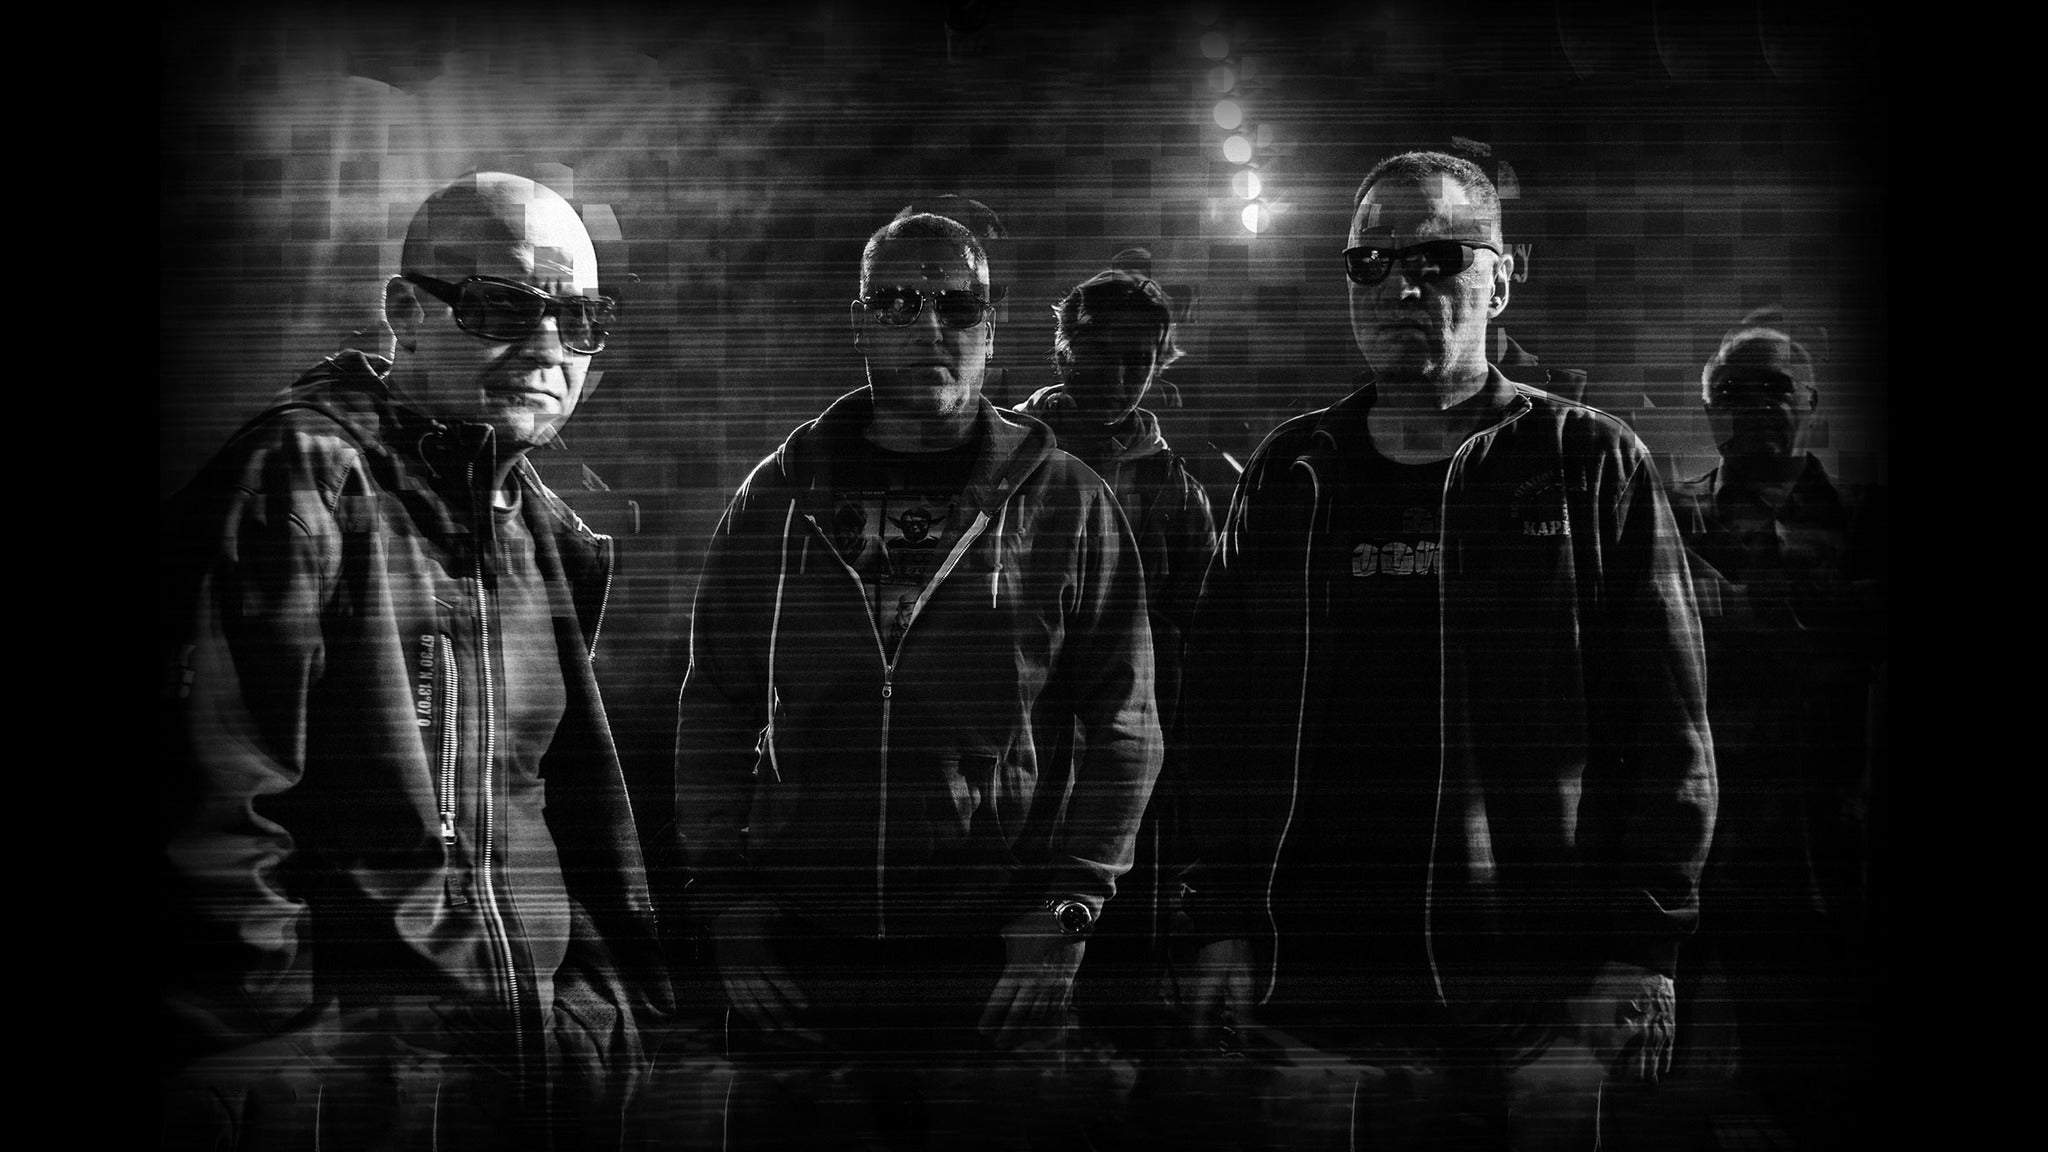 FRONT 242 plus AZAR SWAN plus GLITCH BLACK in New Orleans promo photo for Live Nation Mobile App presale offer code